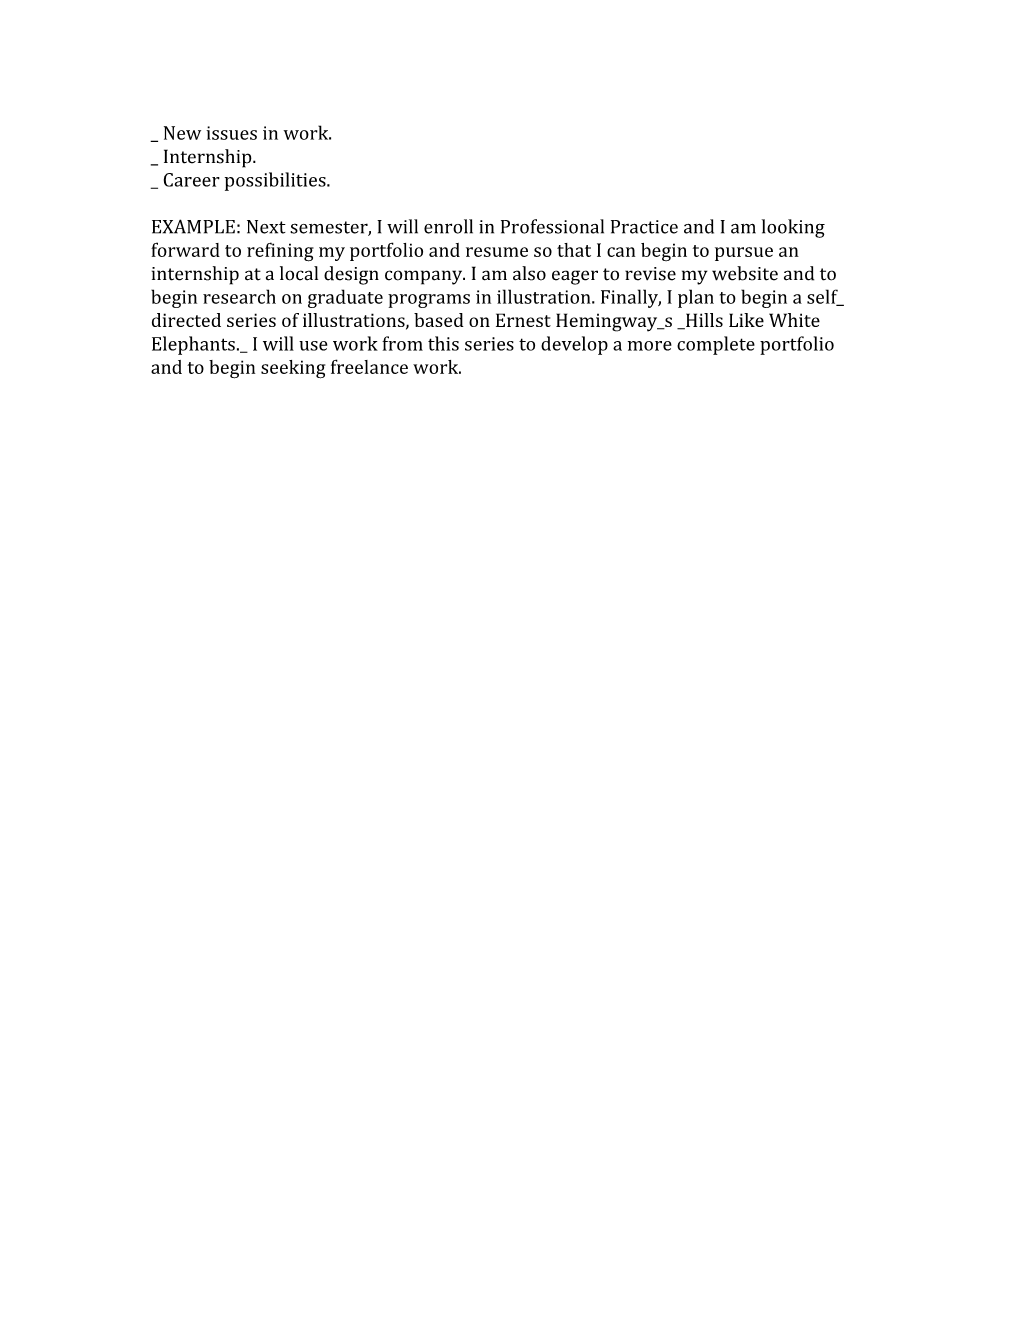 Writing a Junior Review Statement (Media and Design)